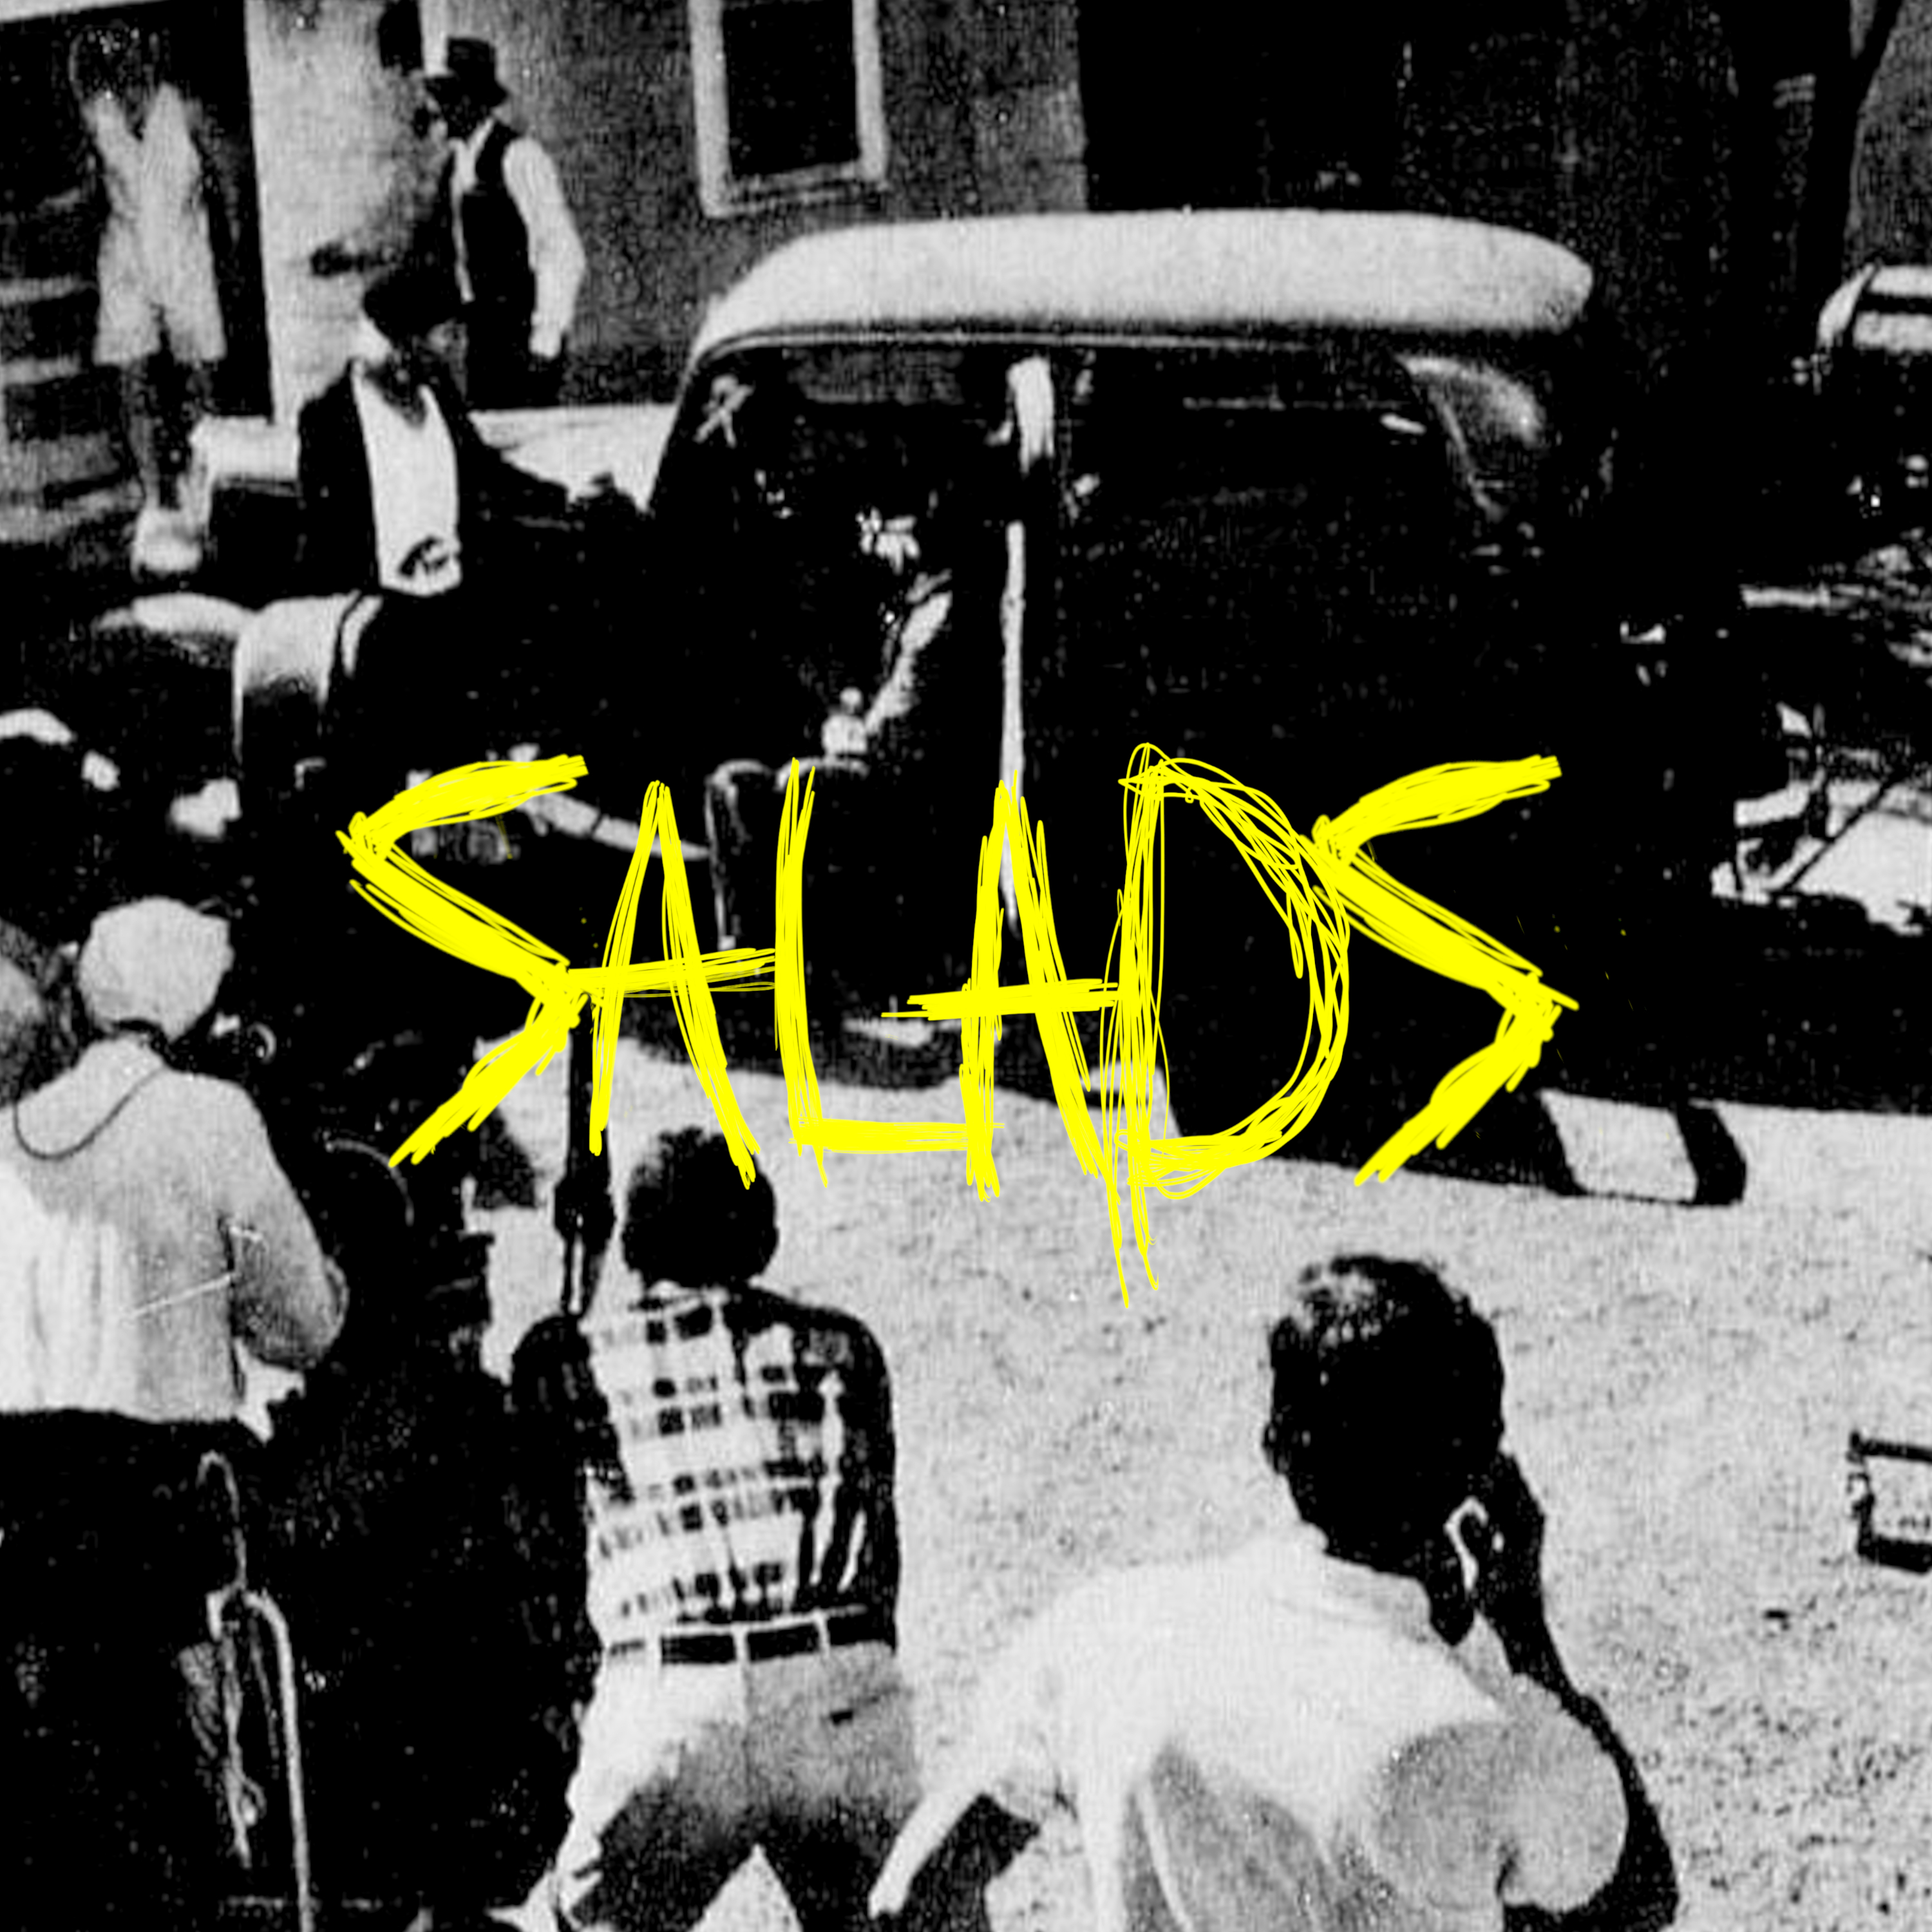 Salads – “Bonnie and Clyde”